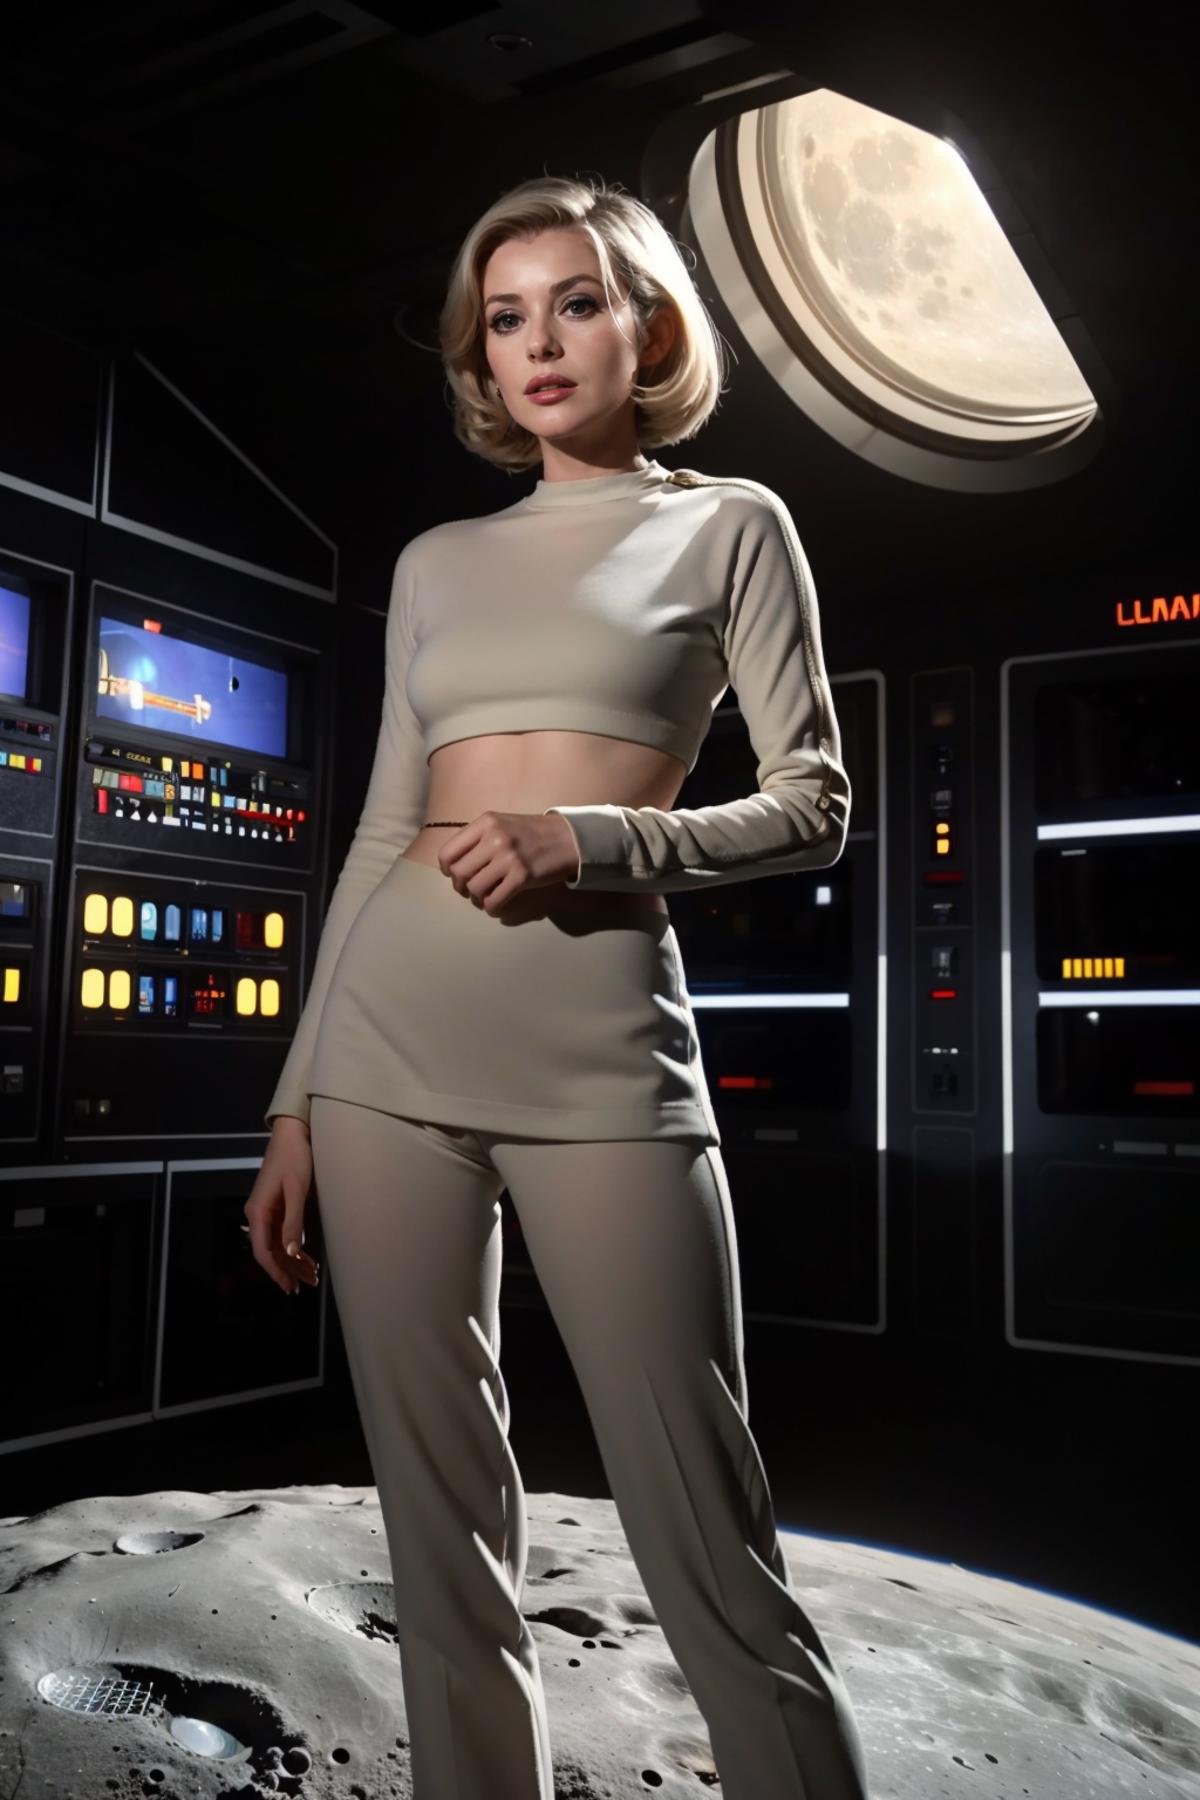 Space 1999 uniforms (small file update) image by BretChampagne